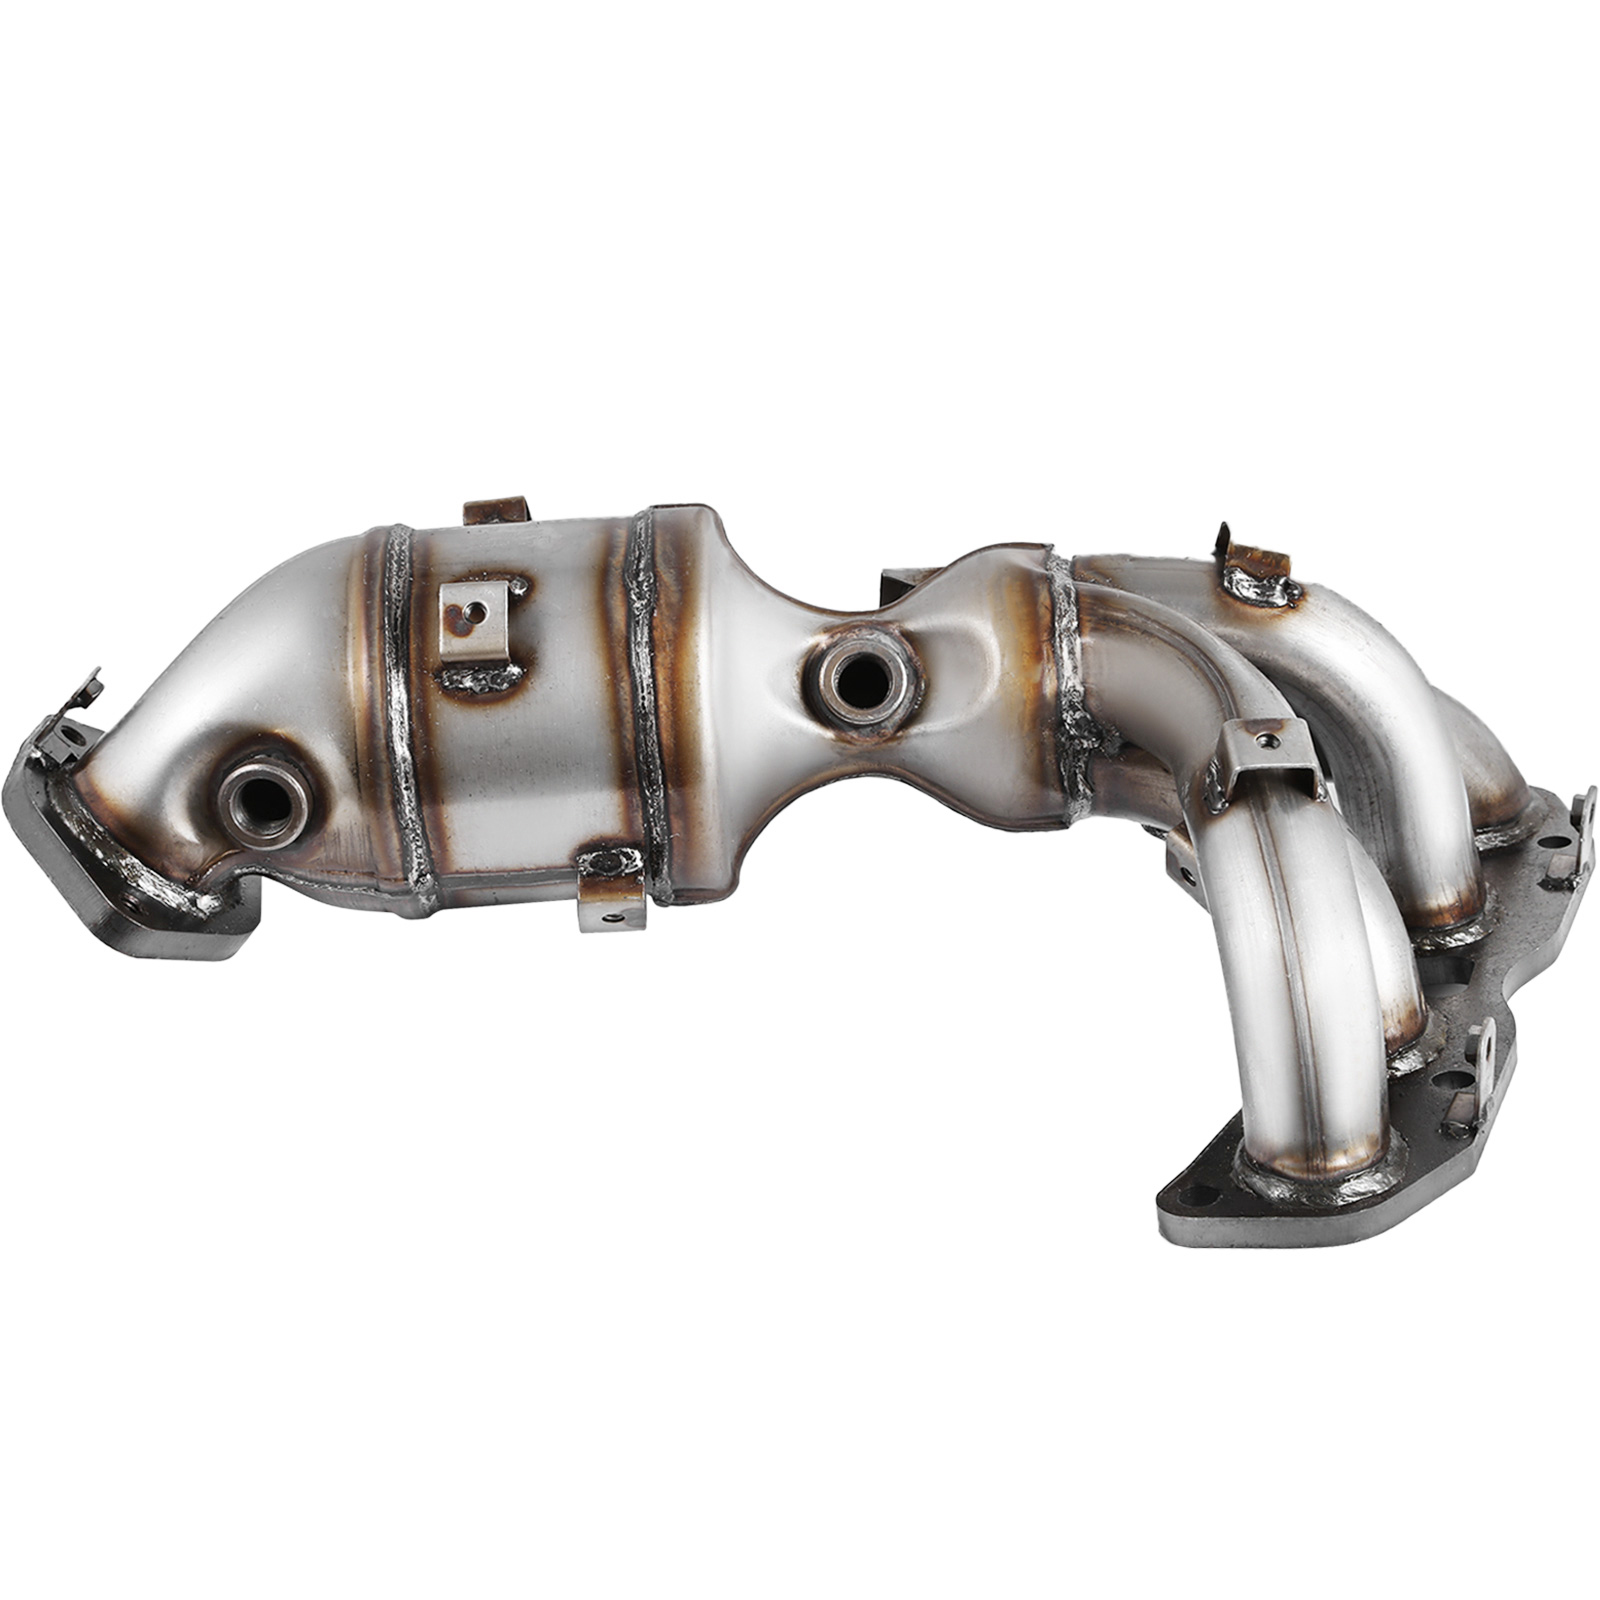 For Nissan Altima 2.5L Manifold Catalytic Converter 2007-2013 Direct Fit OBD II | eBay Catalytic Converter For A 2007 Nissan Altima